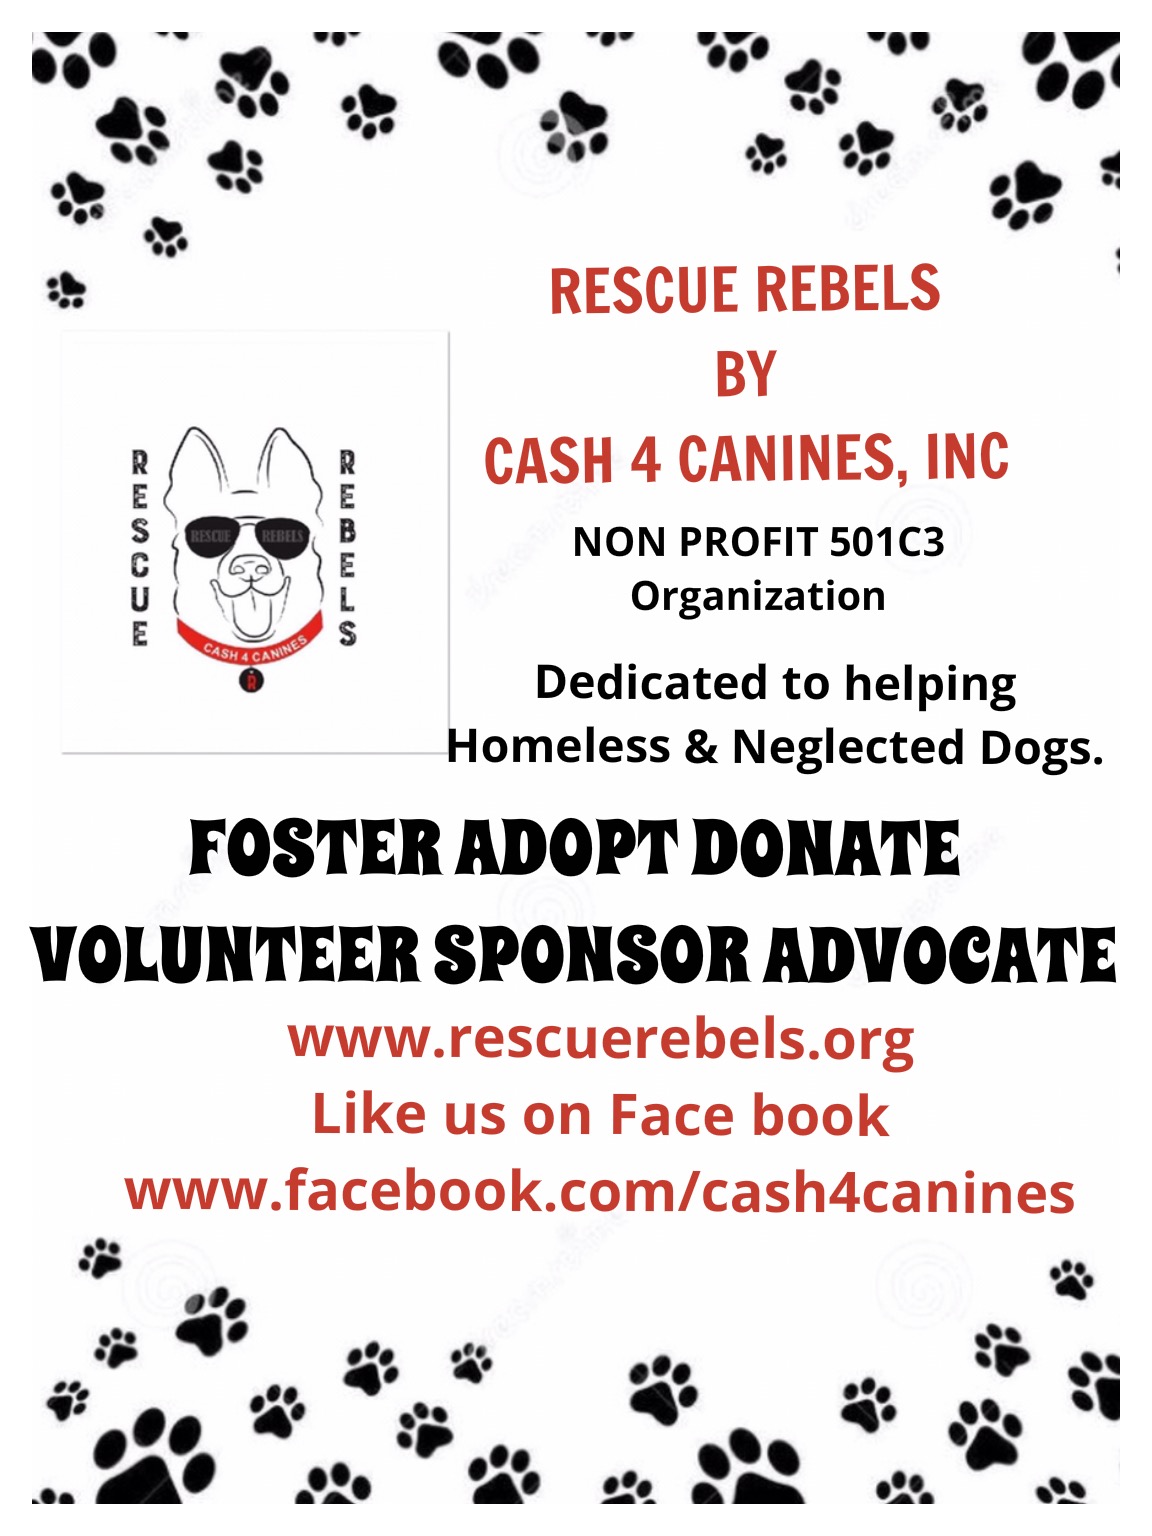 Rescue Rebels by Cash 4 Canines